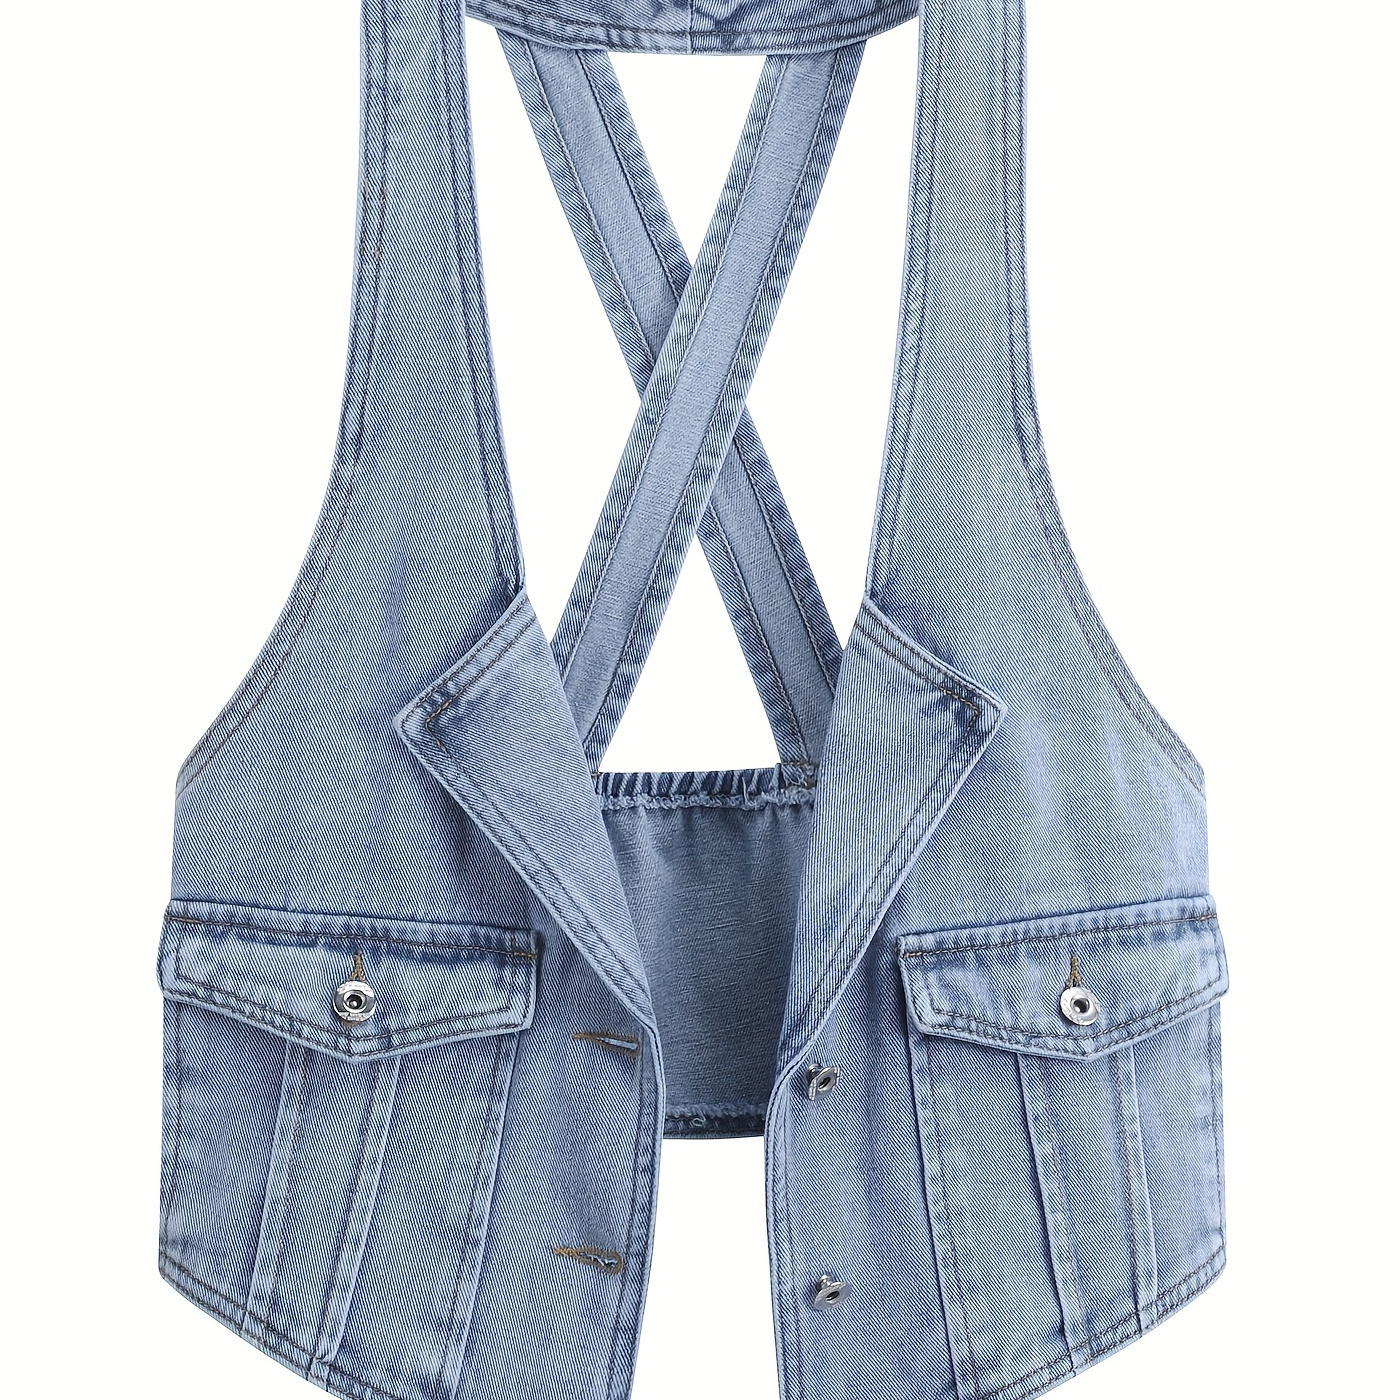 

Women's Plus Size Denim Vest, Fashionable Sleeveless Plain Washed Blue Jacket, Casual Style For Spring/summer Season - Perfect For Fall & Winter